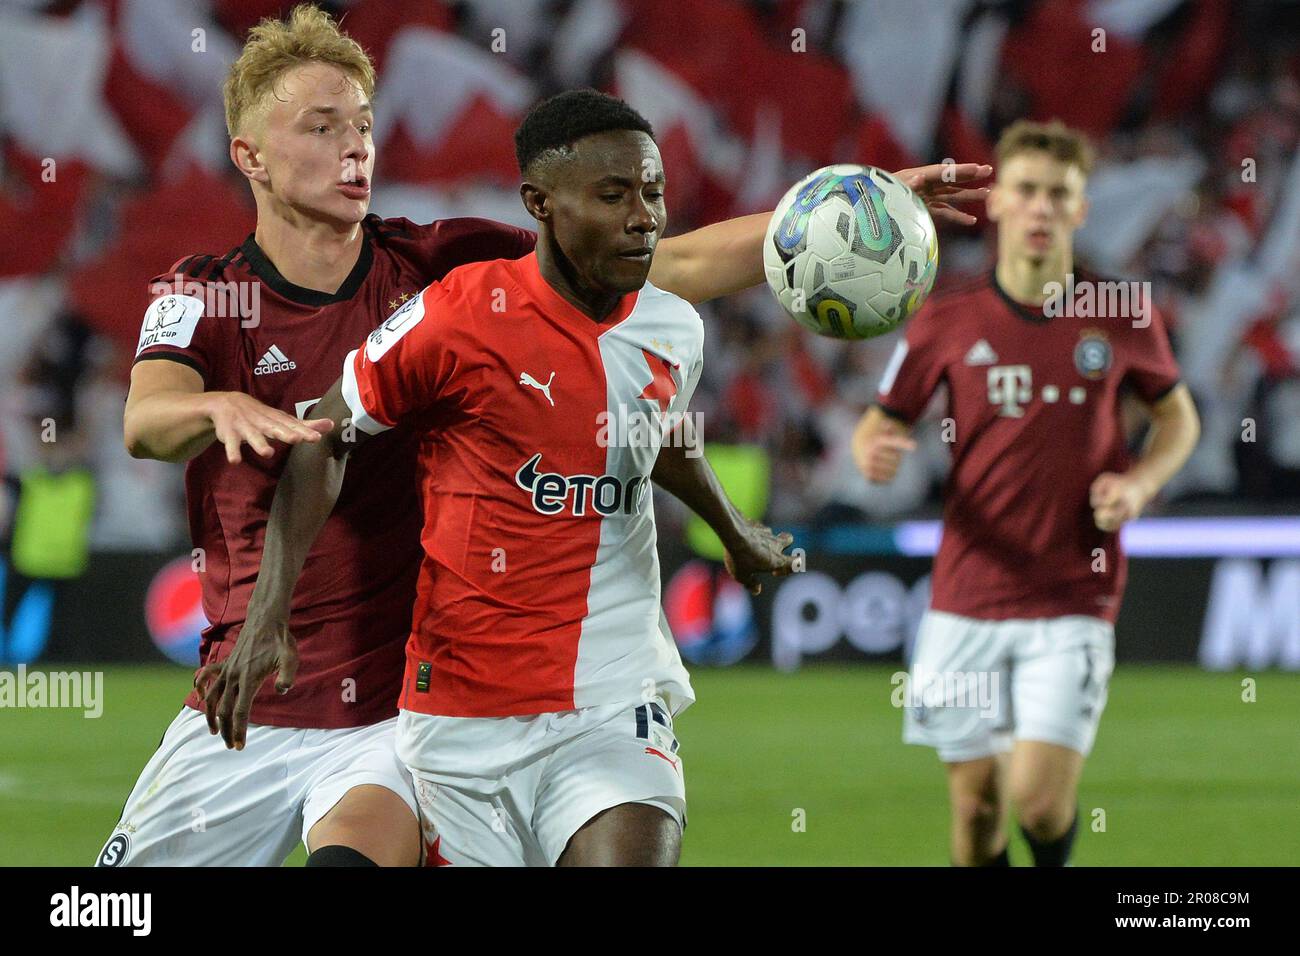 Prague, Czech Republic. 3rd May, 2023. OSCAR DORLEY of Slavia Praha fights  for the ball with Sparta's ADAM KARABEC (L) during Czech Cup of 2022-2023  at May 03, 2023, in Prague as